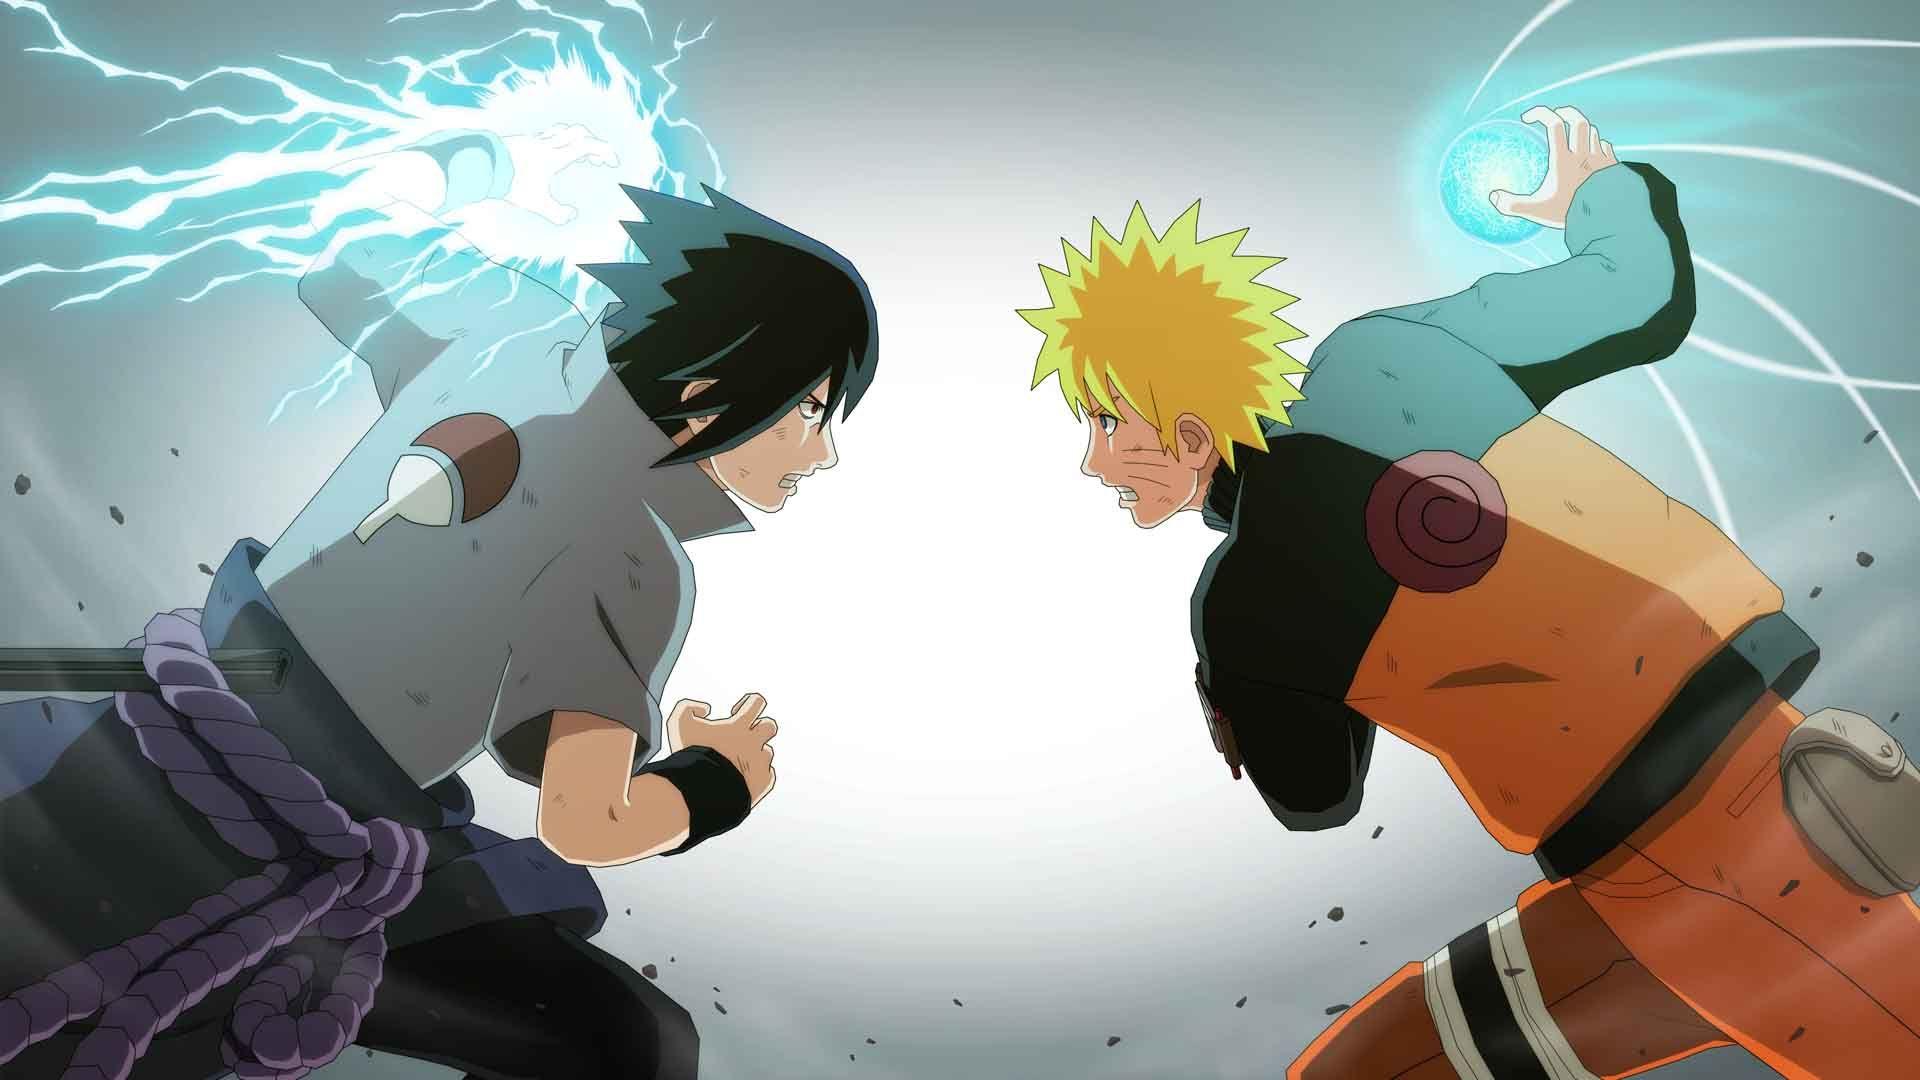 Play Naruto Online, the browser MMORPG, starting July 20